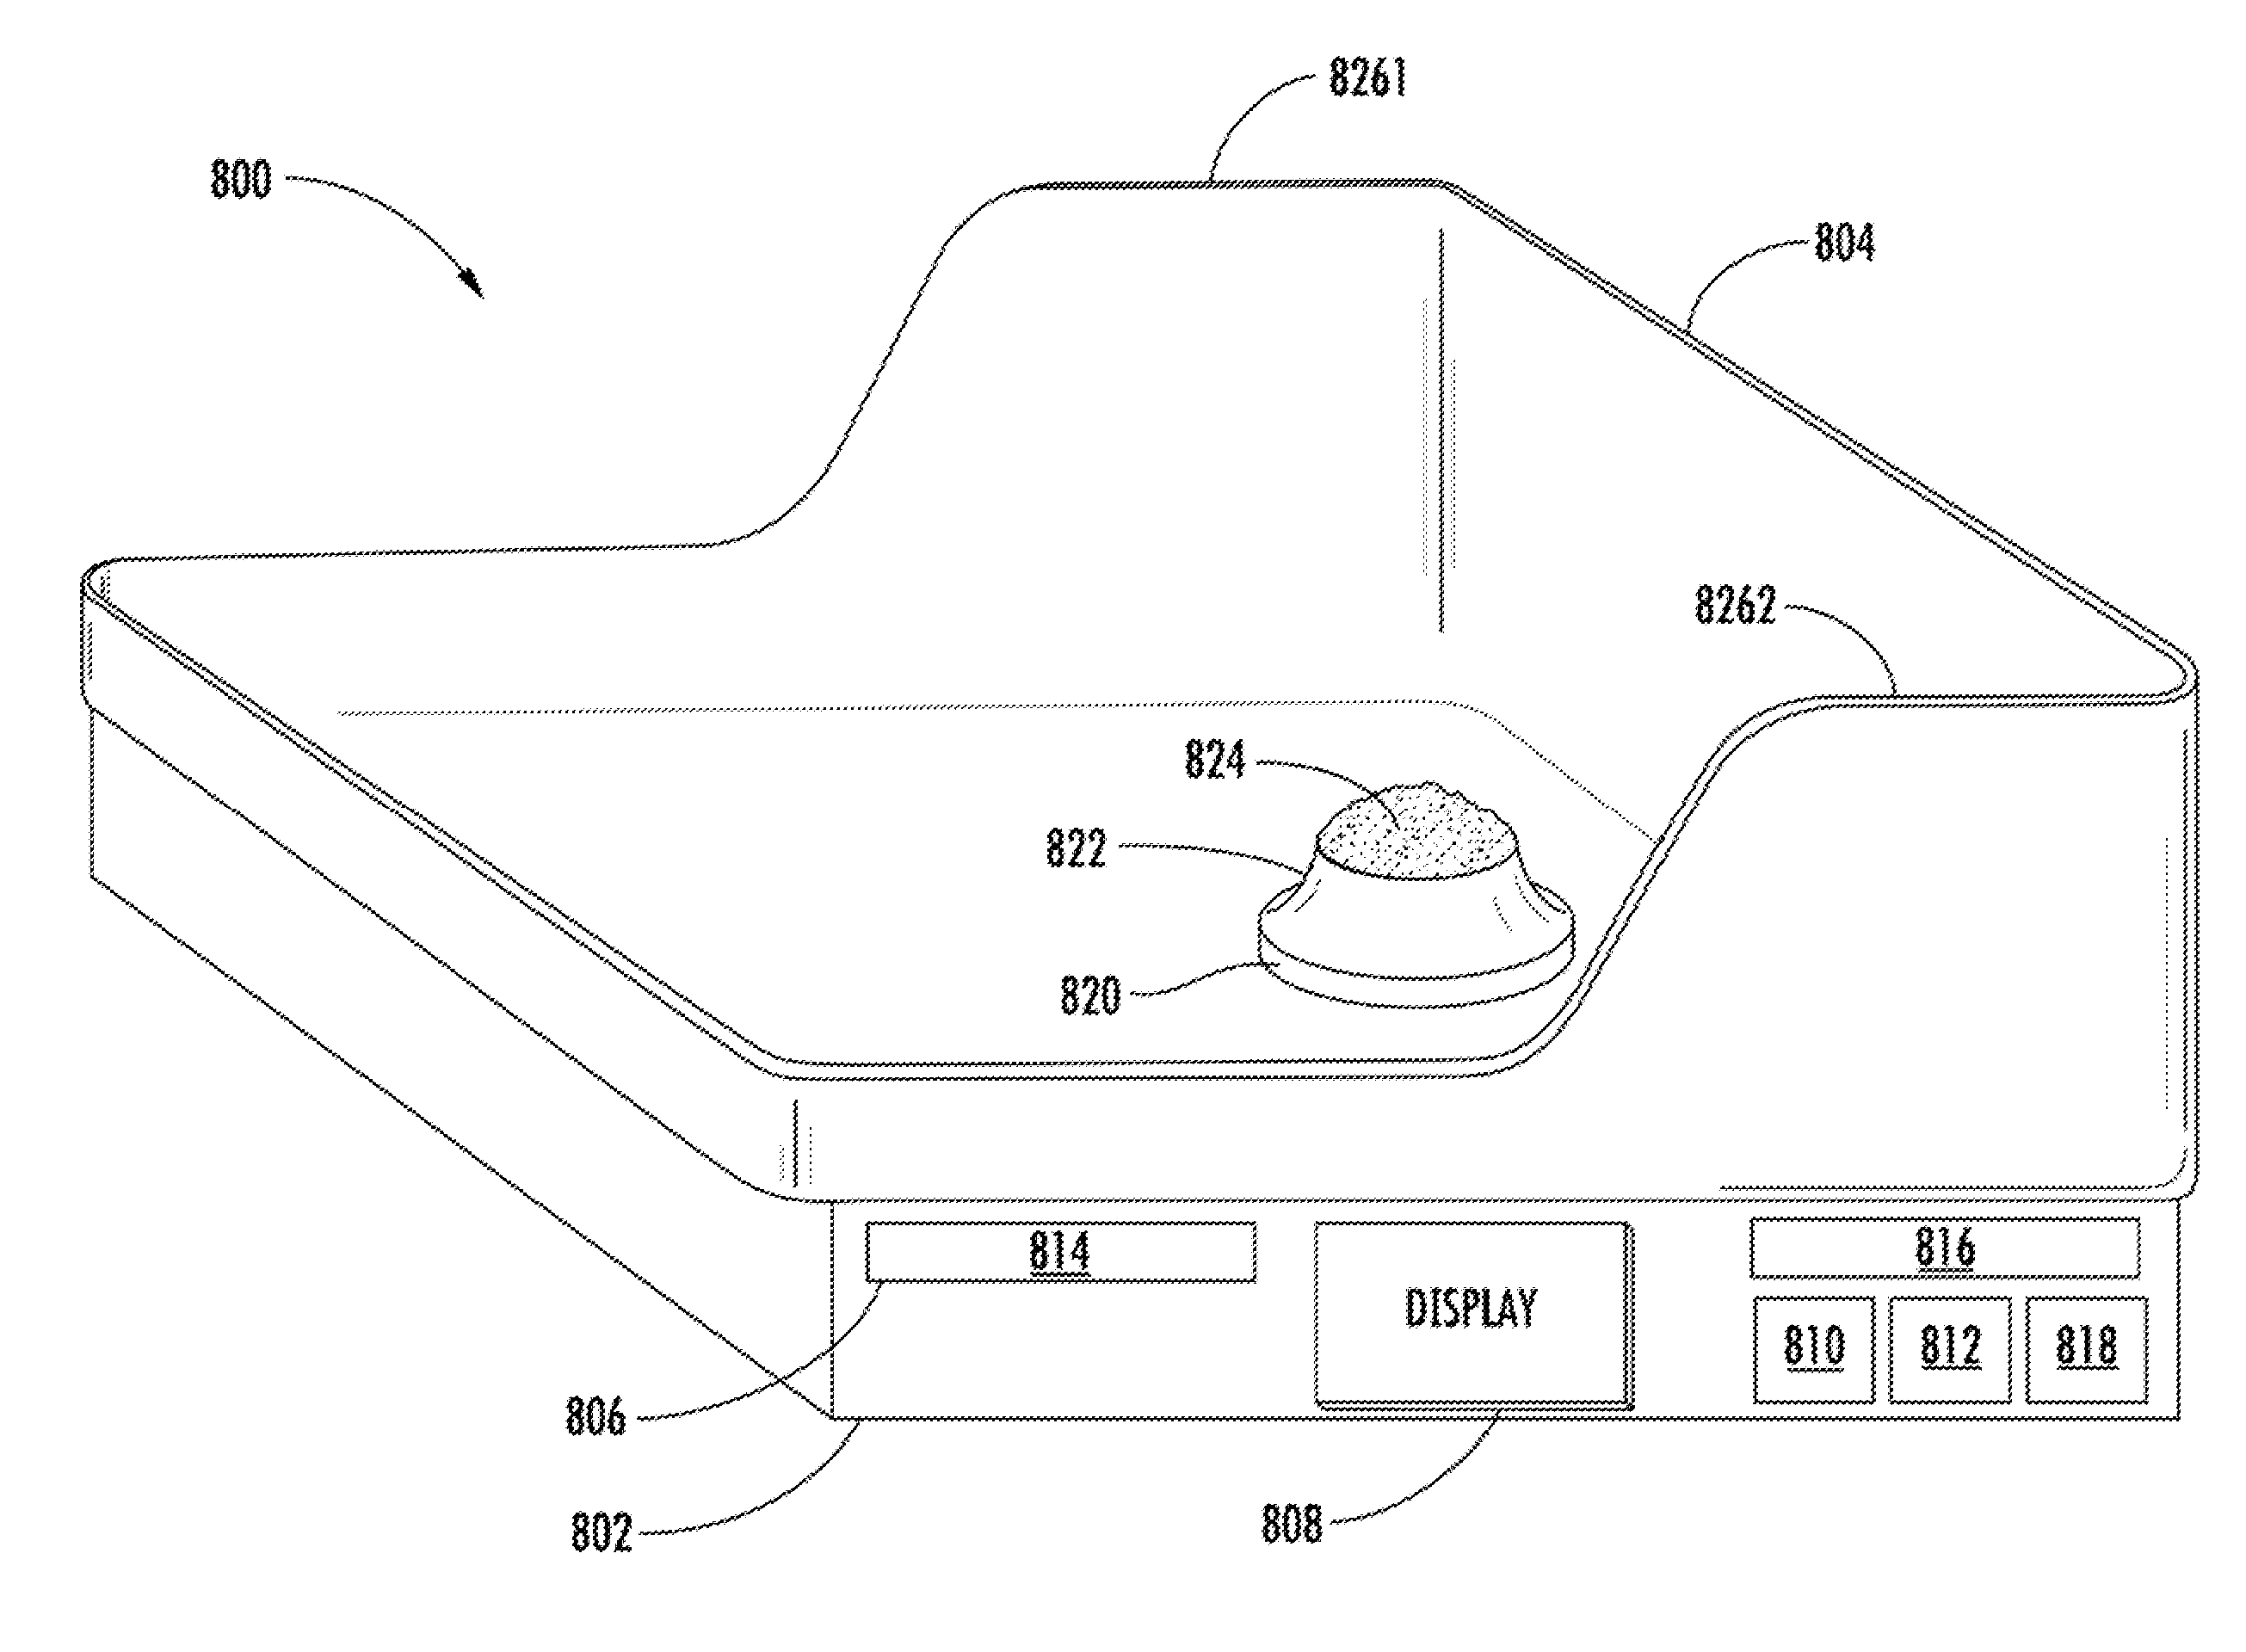 Systems, methods and computer program products for monitoring the behavior, health, and/or characteristics of an animal